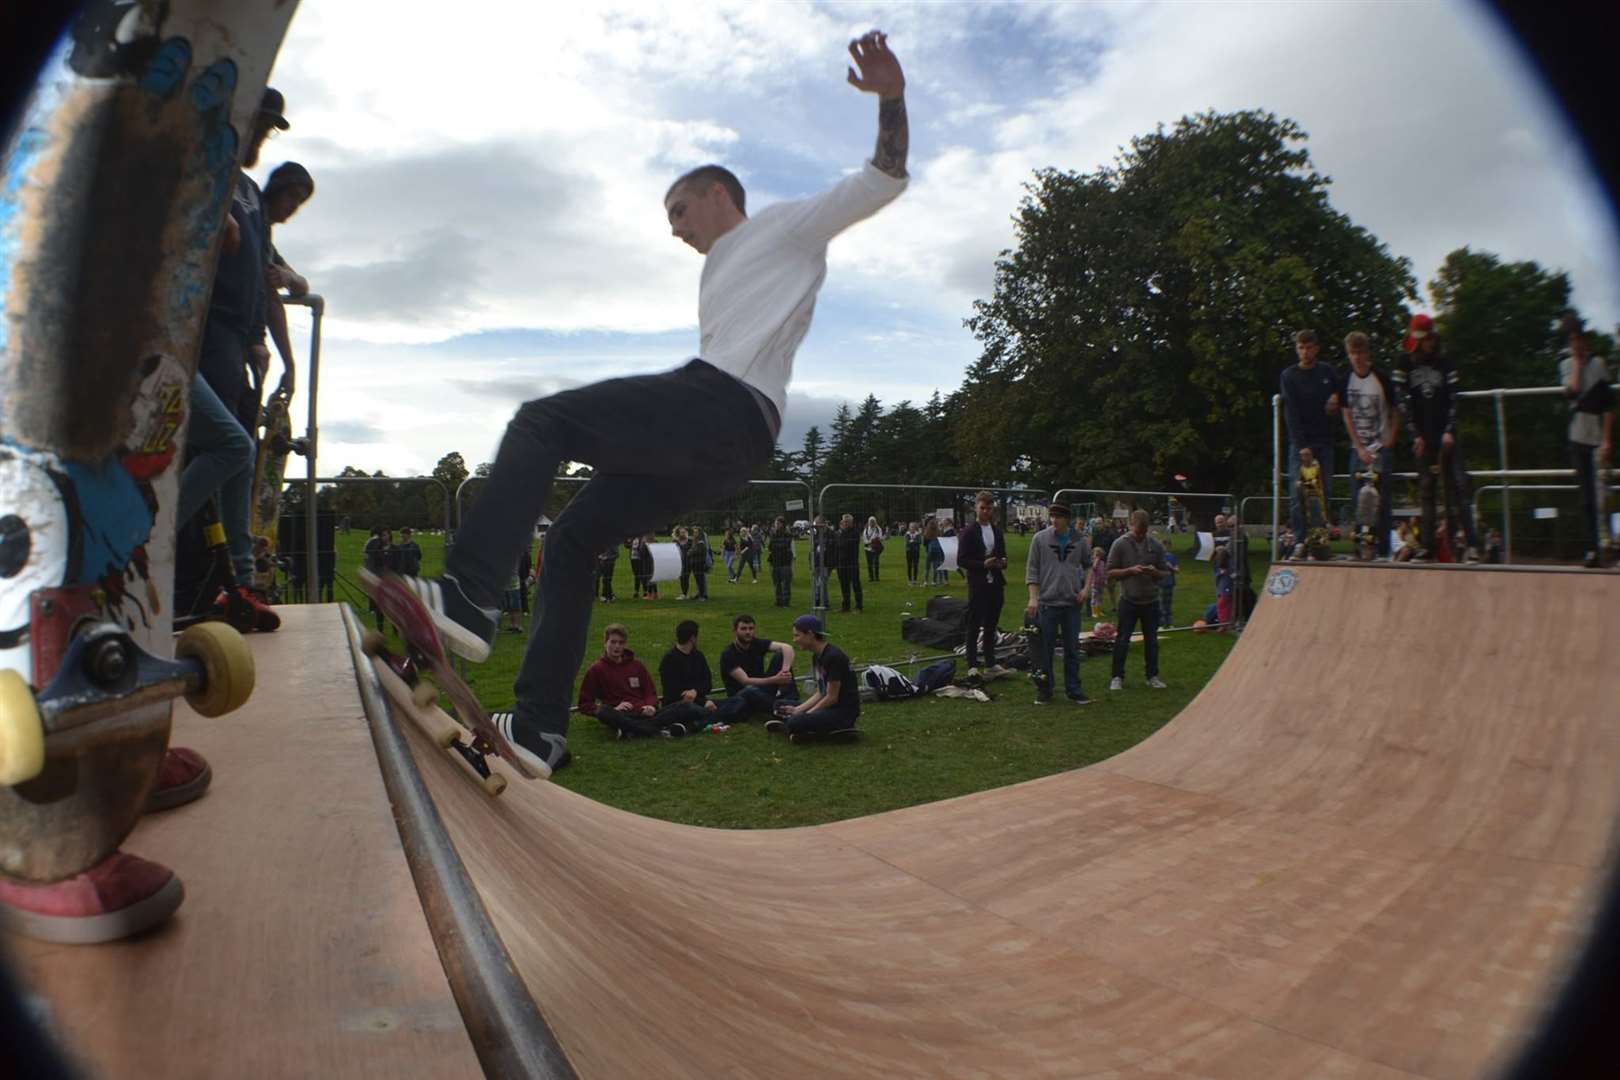 Forres Culture Day Ramp Jam showcased the project at Grant Park in 2016 and was attended by a number of enthusiasts on both four wheels and two.